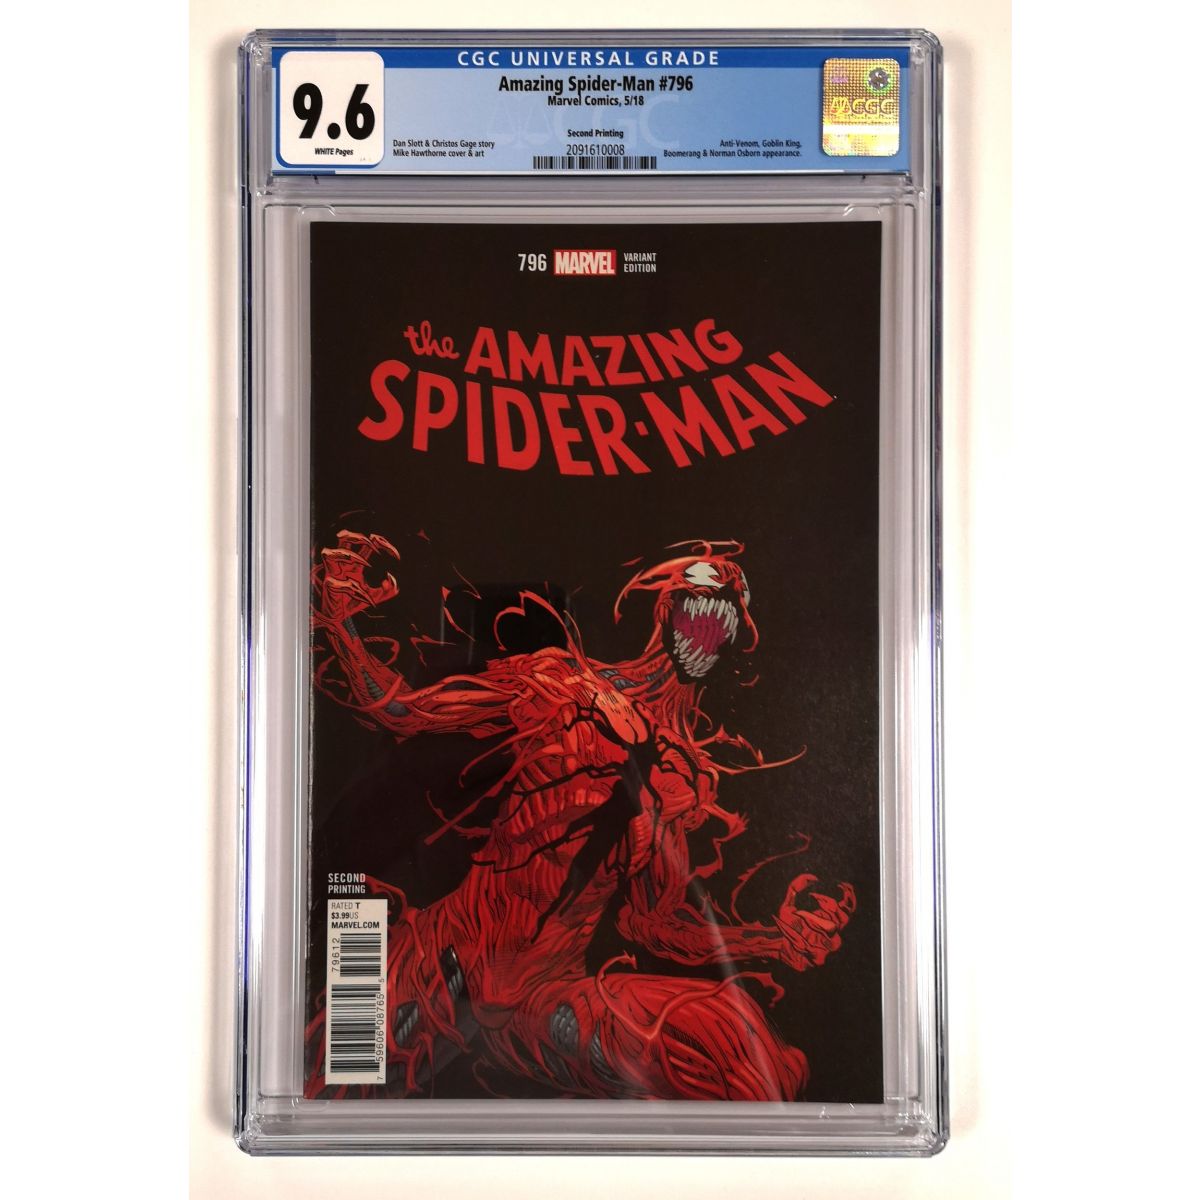 Item Comics - Marvel - Amazing Spider-Man N°796 (2017 5th Series) - [CGC 9.6 - White Pages]